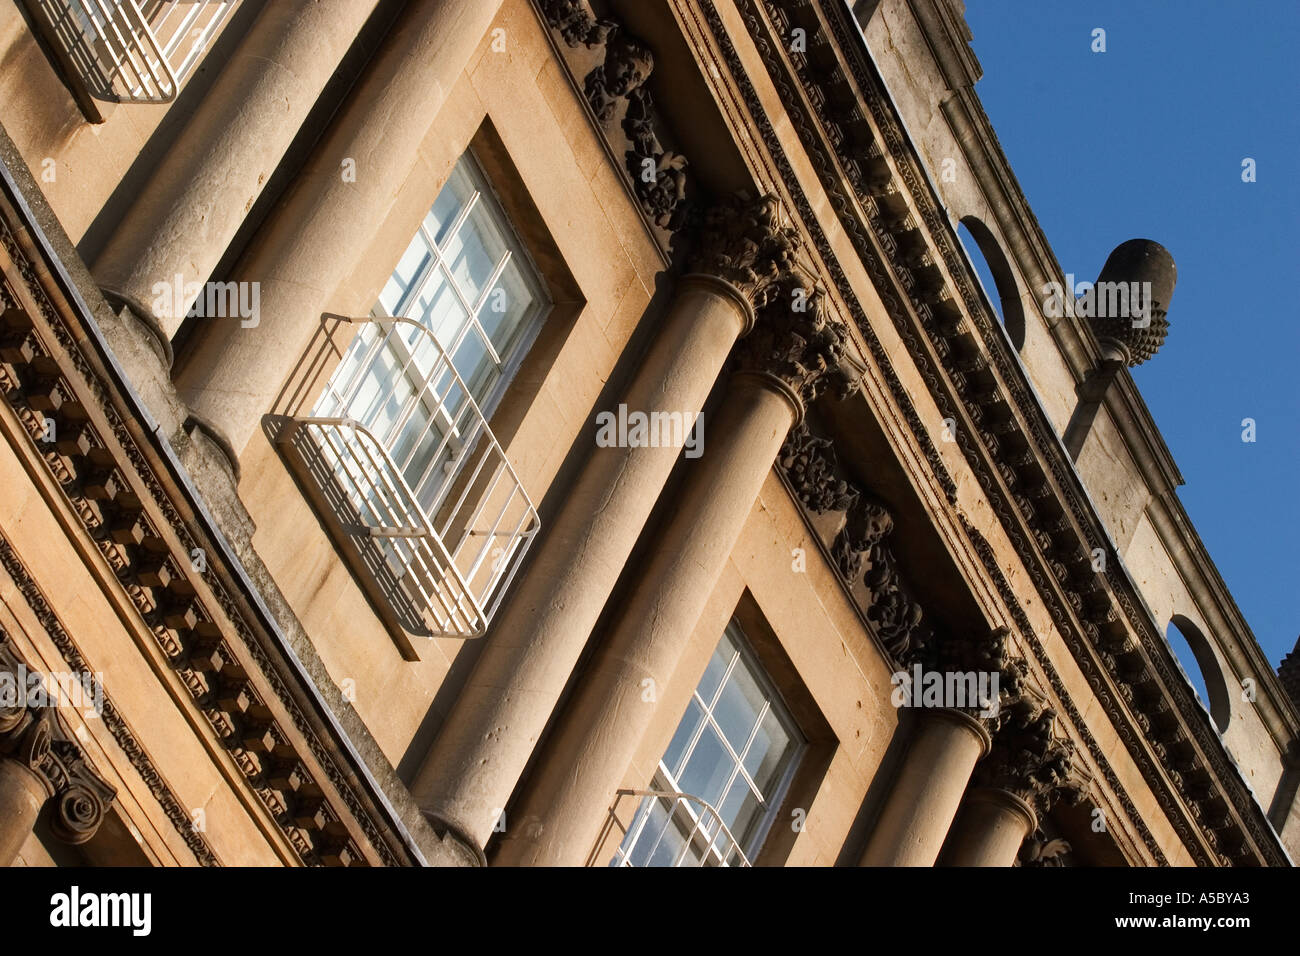 Part of the third register of The Circus in Bath England showing corinthian columns Stock Photo